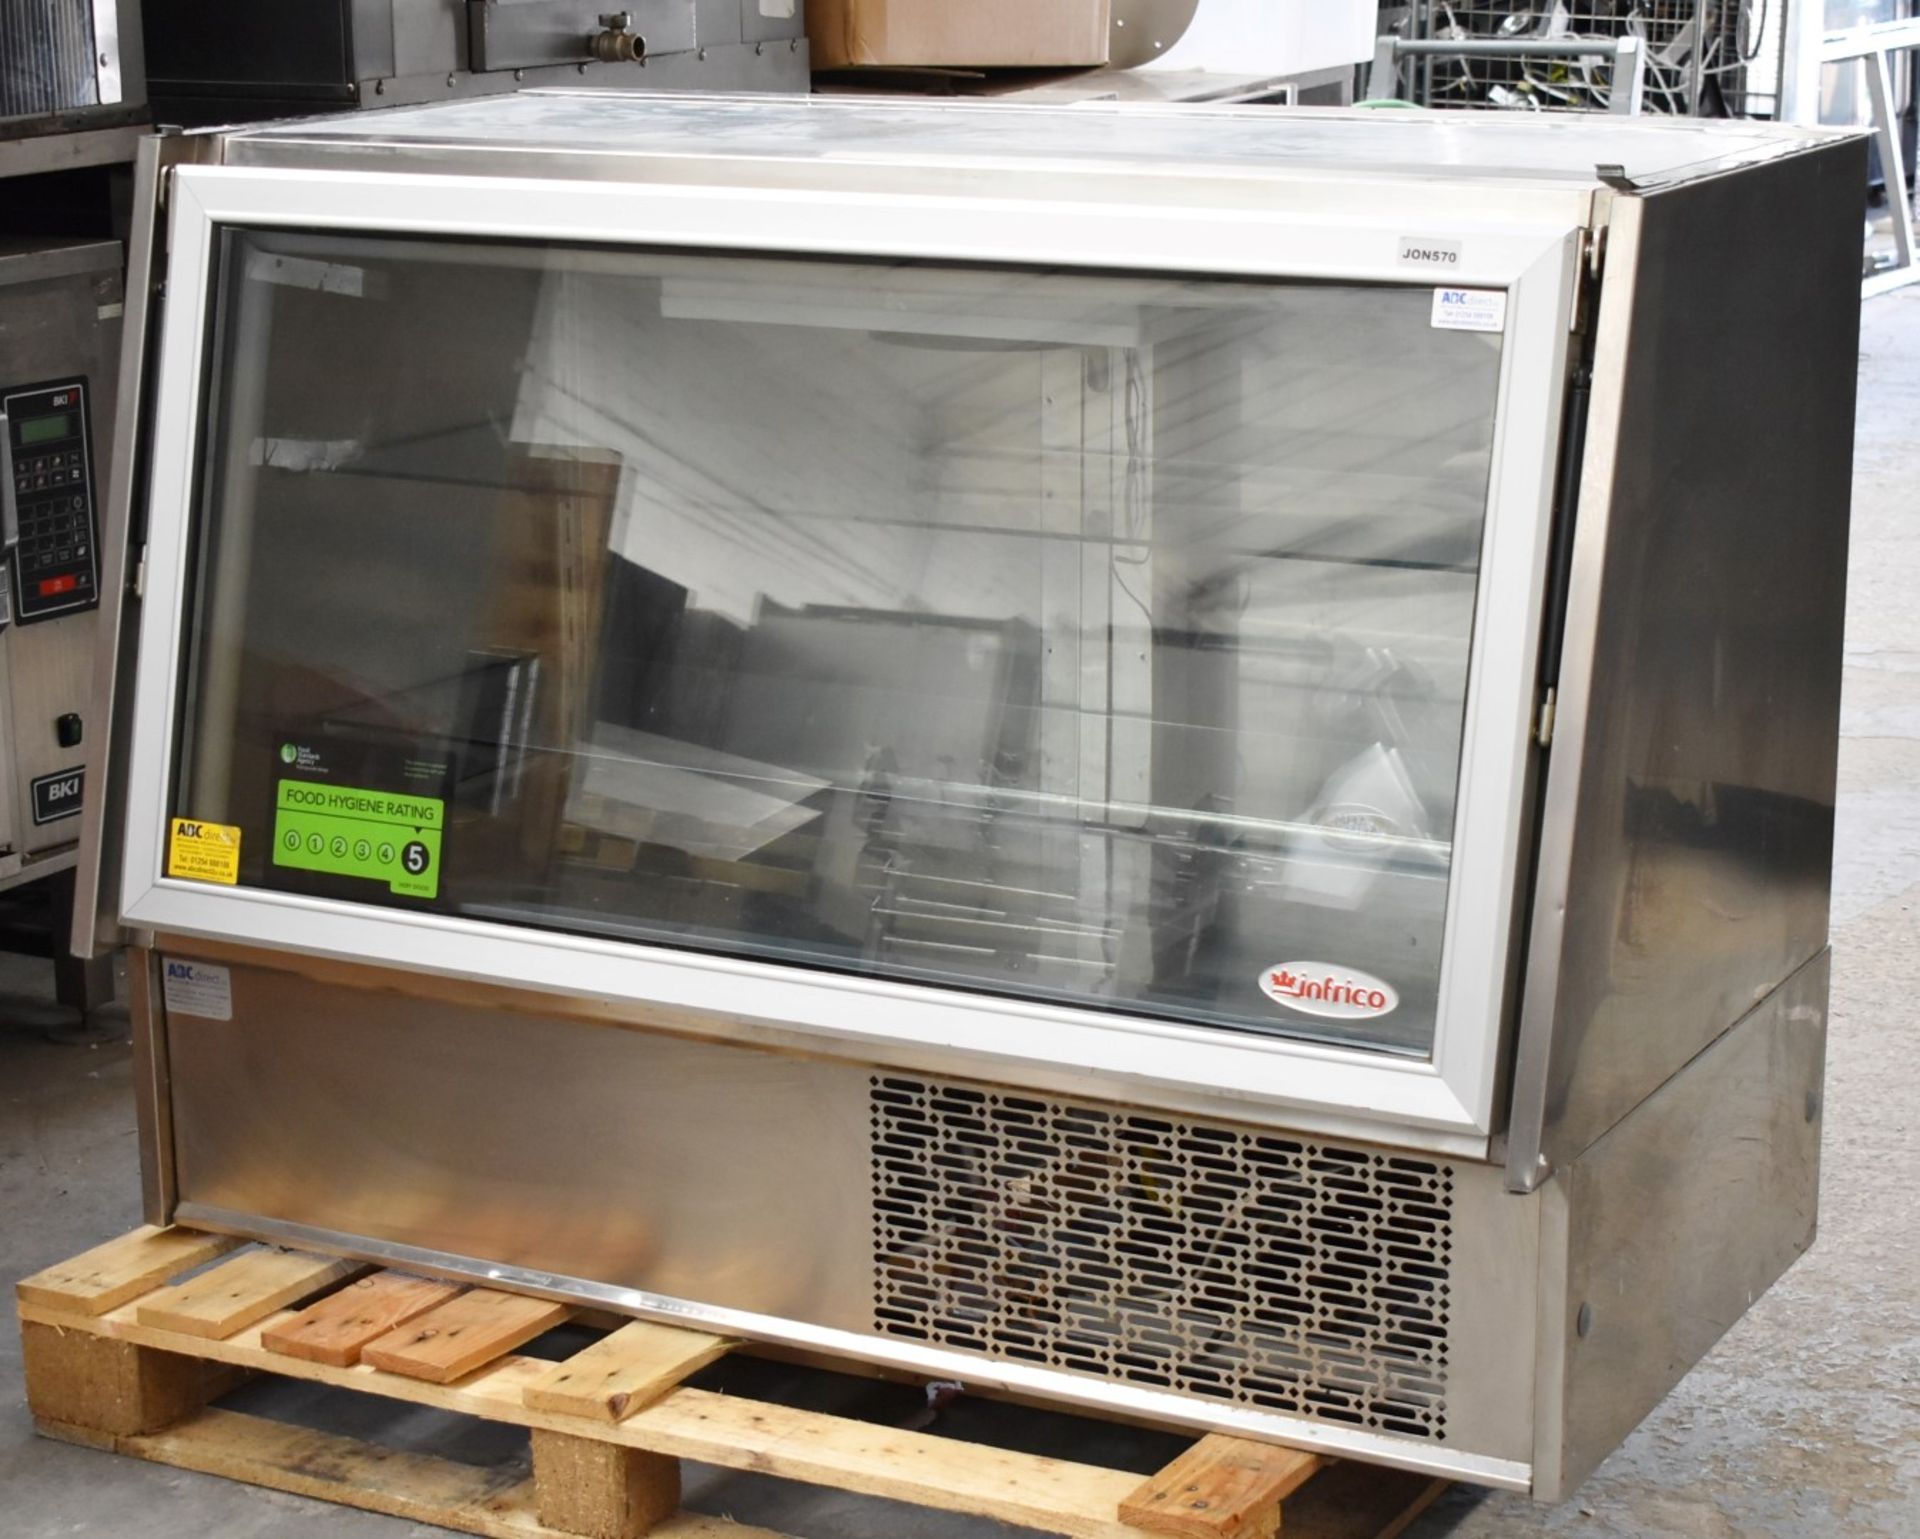 1 x Infrico 1.4m Refrigerated Vision Counter For Takeaways, Sandwich Shops or Cafes - RRP £3,200! - Image 14 of 21